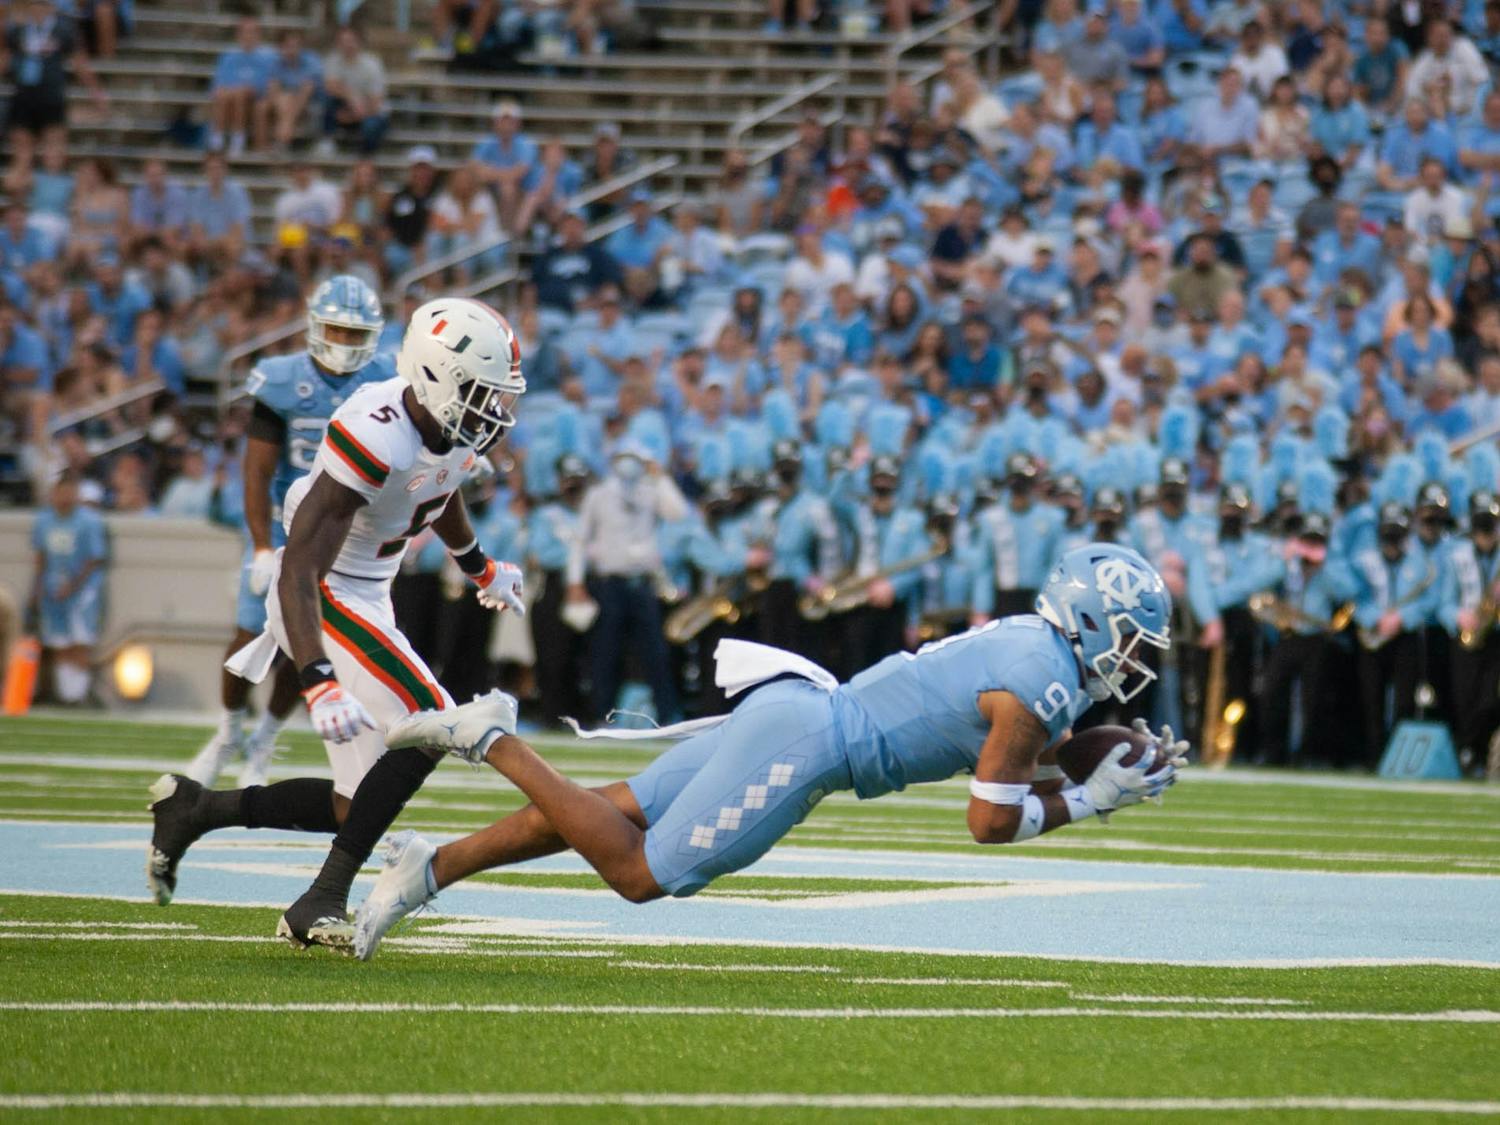 Junior defensive back Cam'Ron Kelly (9) receives the ball during the Tar Heels' football game at Kenan Stadium on Oct. 16 against Miami. UNC won 45-42.